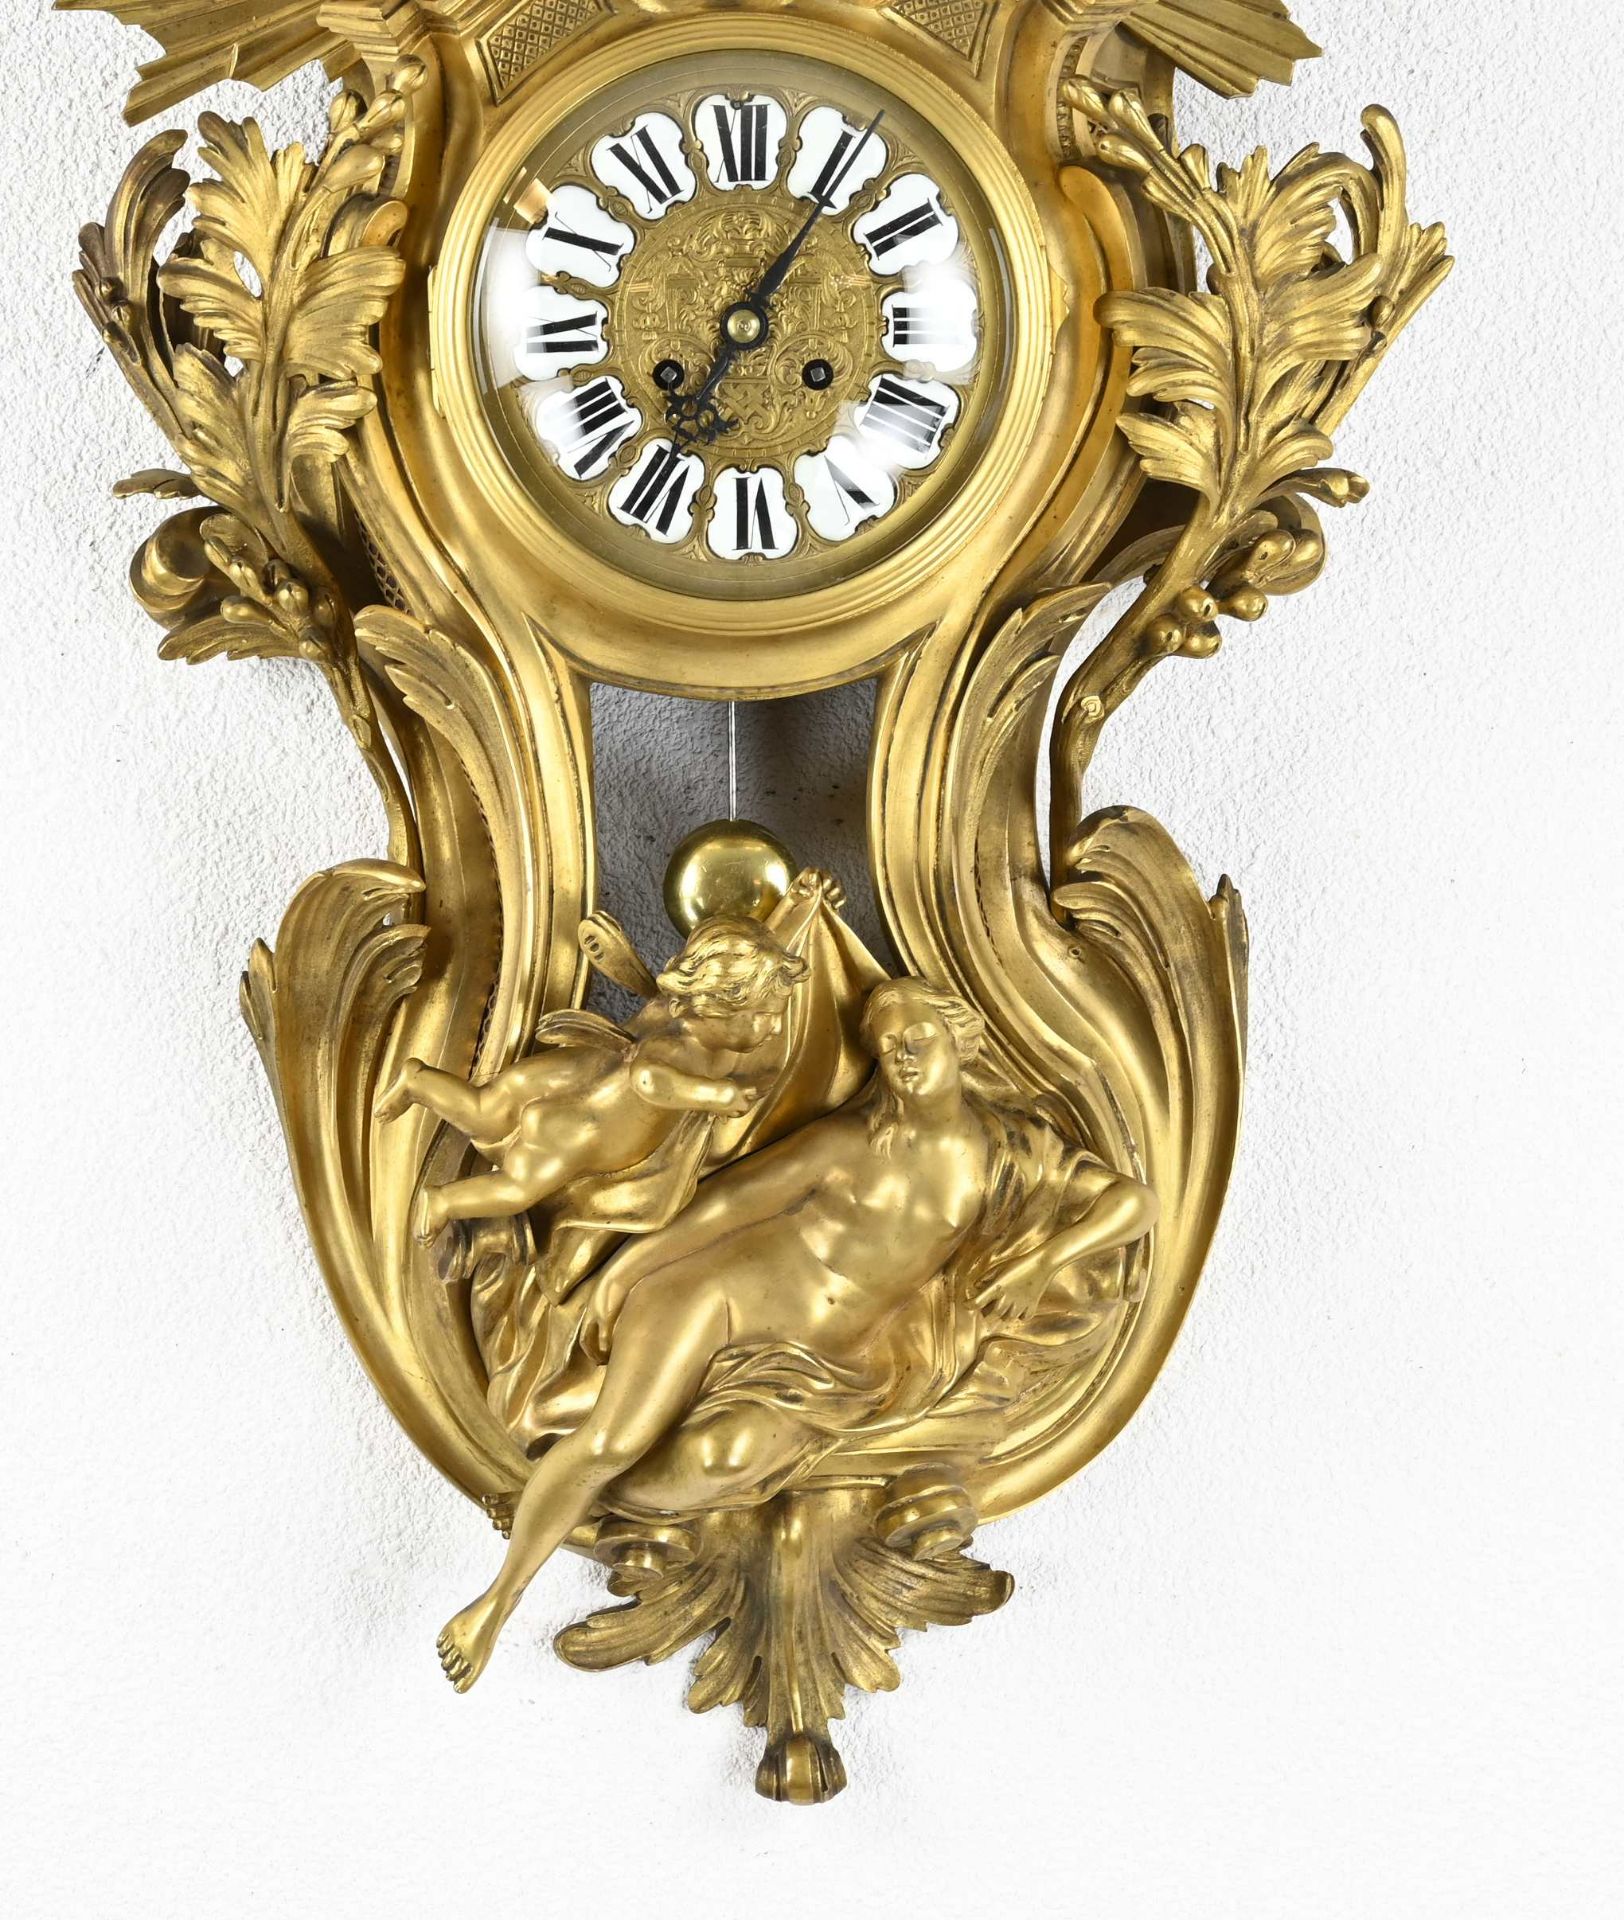 19th century French cartel clock, 1850 - Image 3 of 3